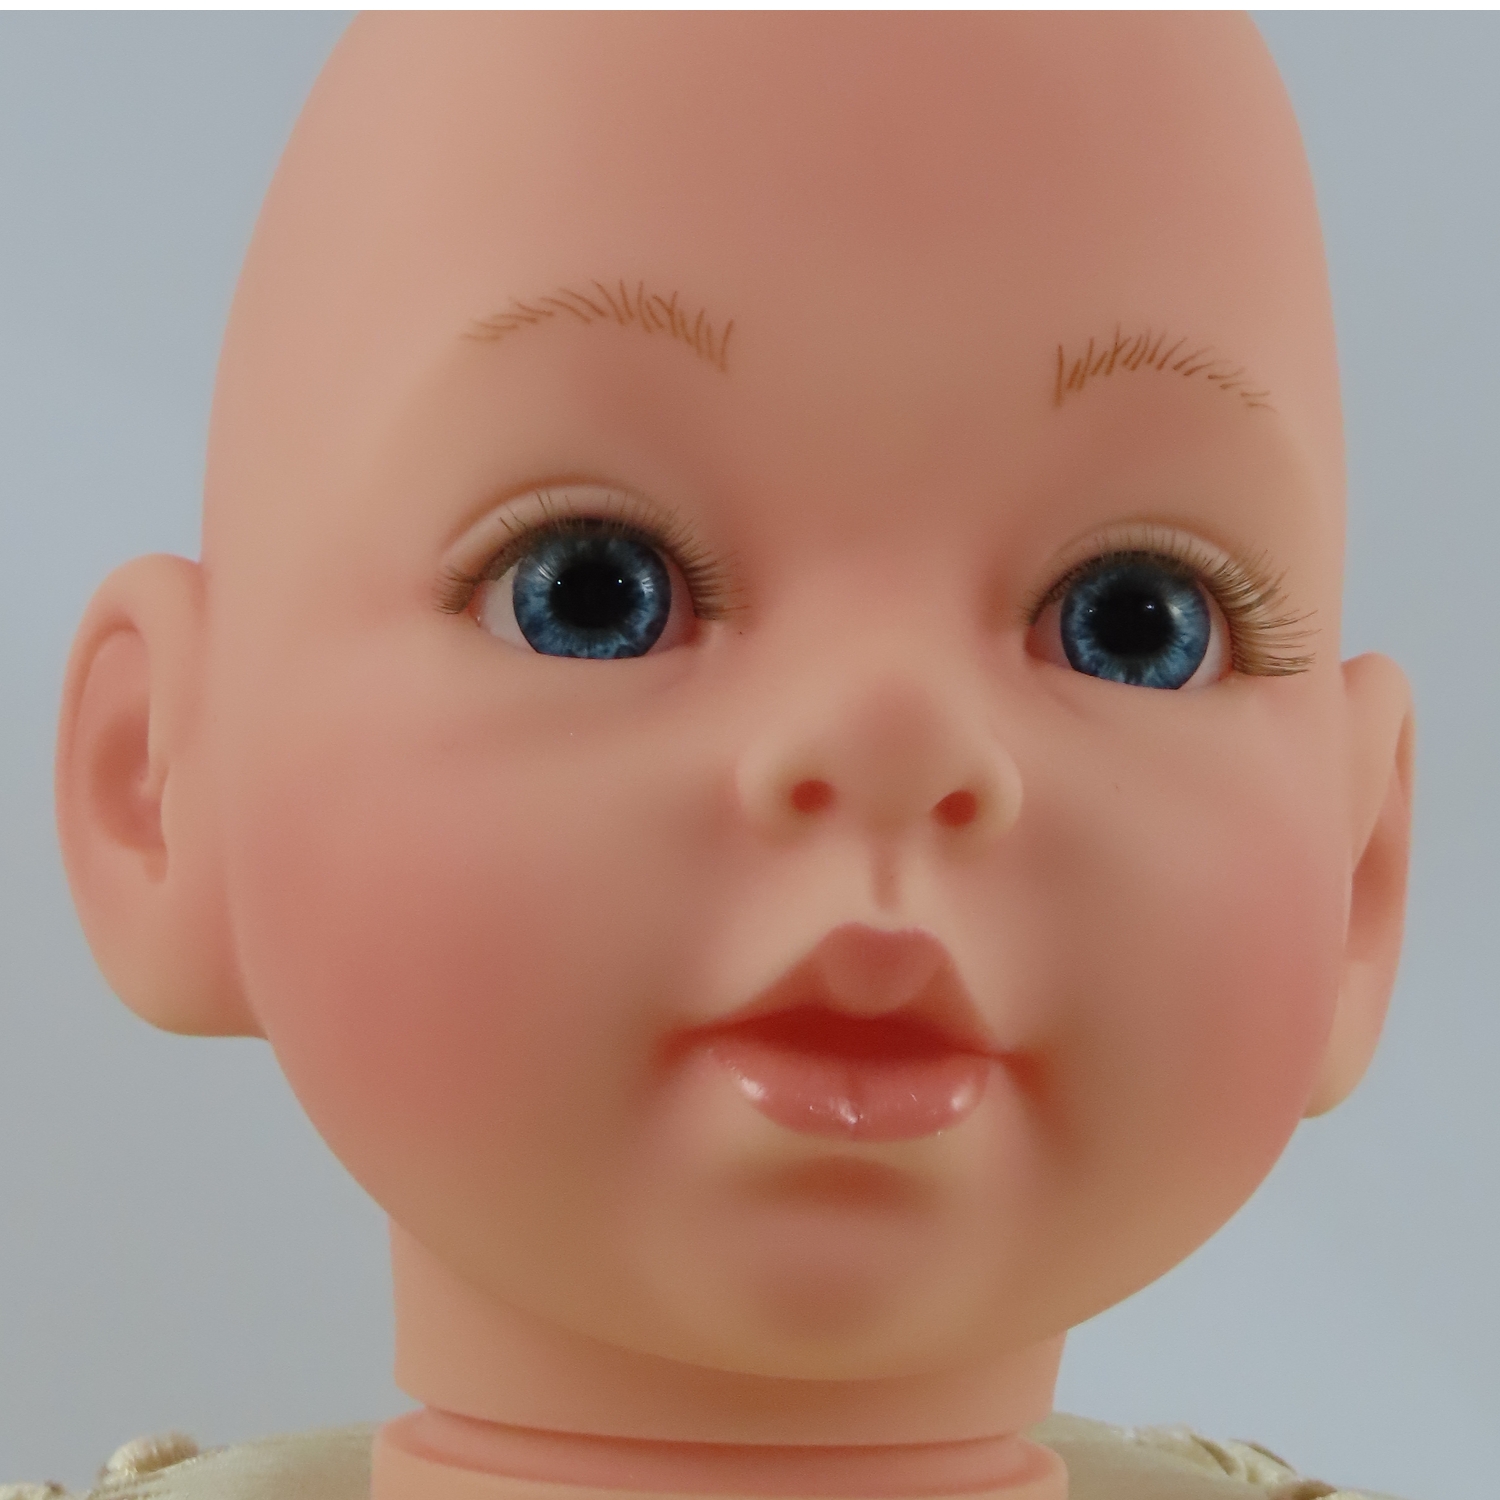 Guppy Doll Kit for Creating Toddler and Baby Dolls That Look Real